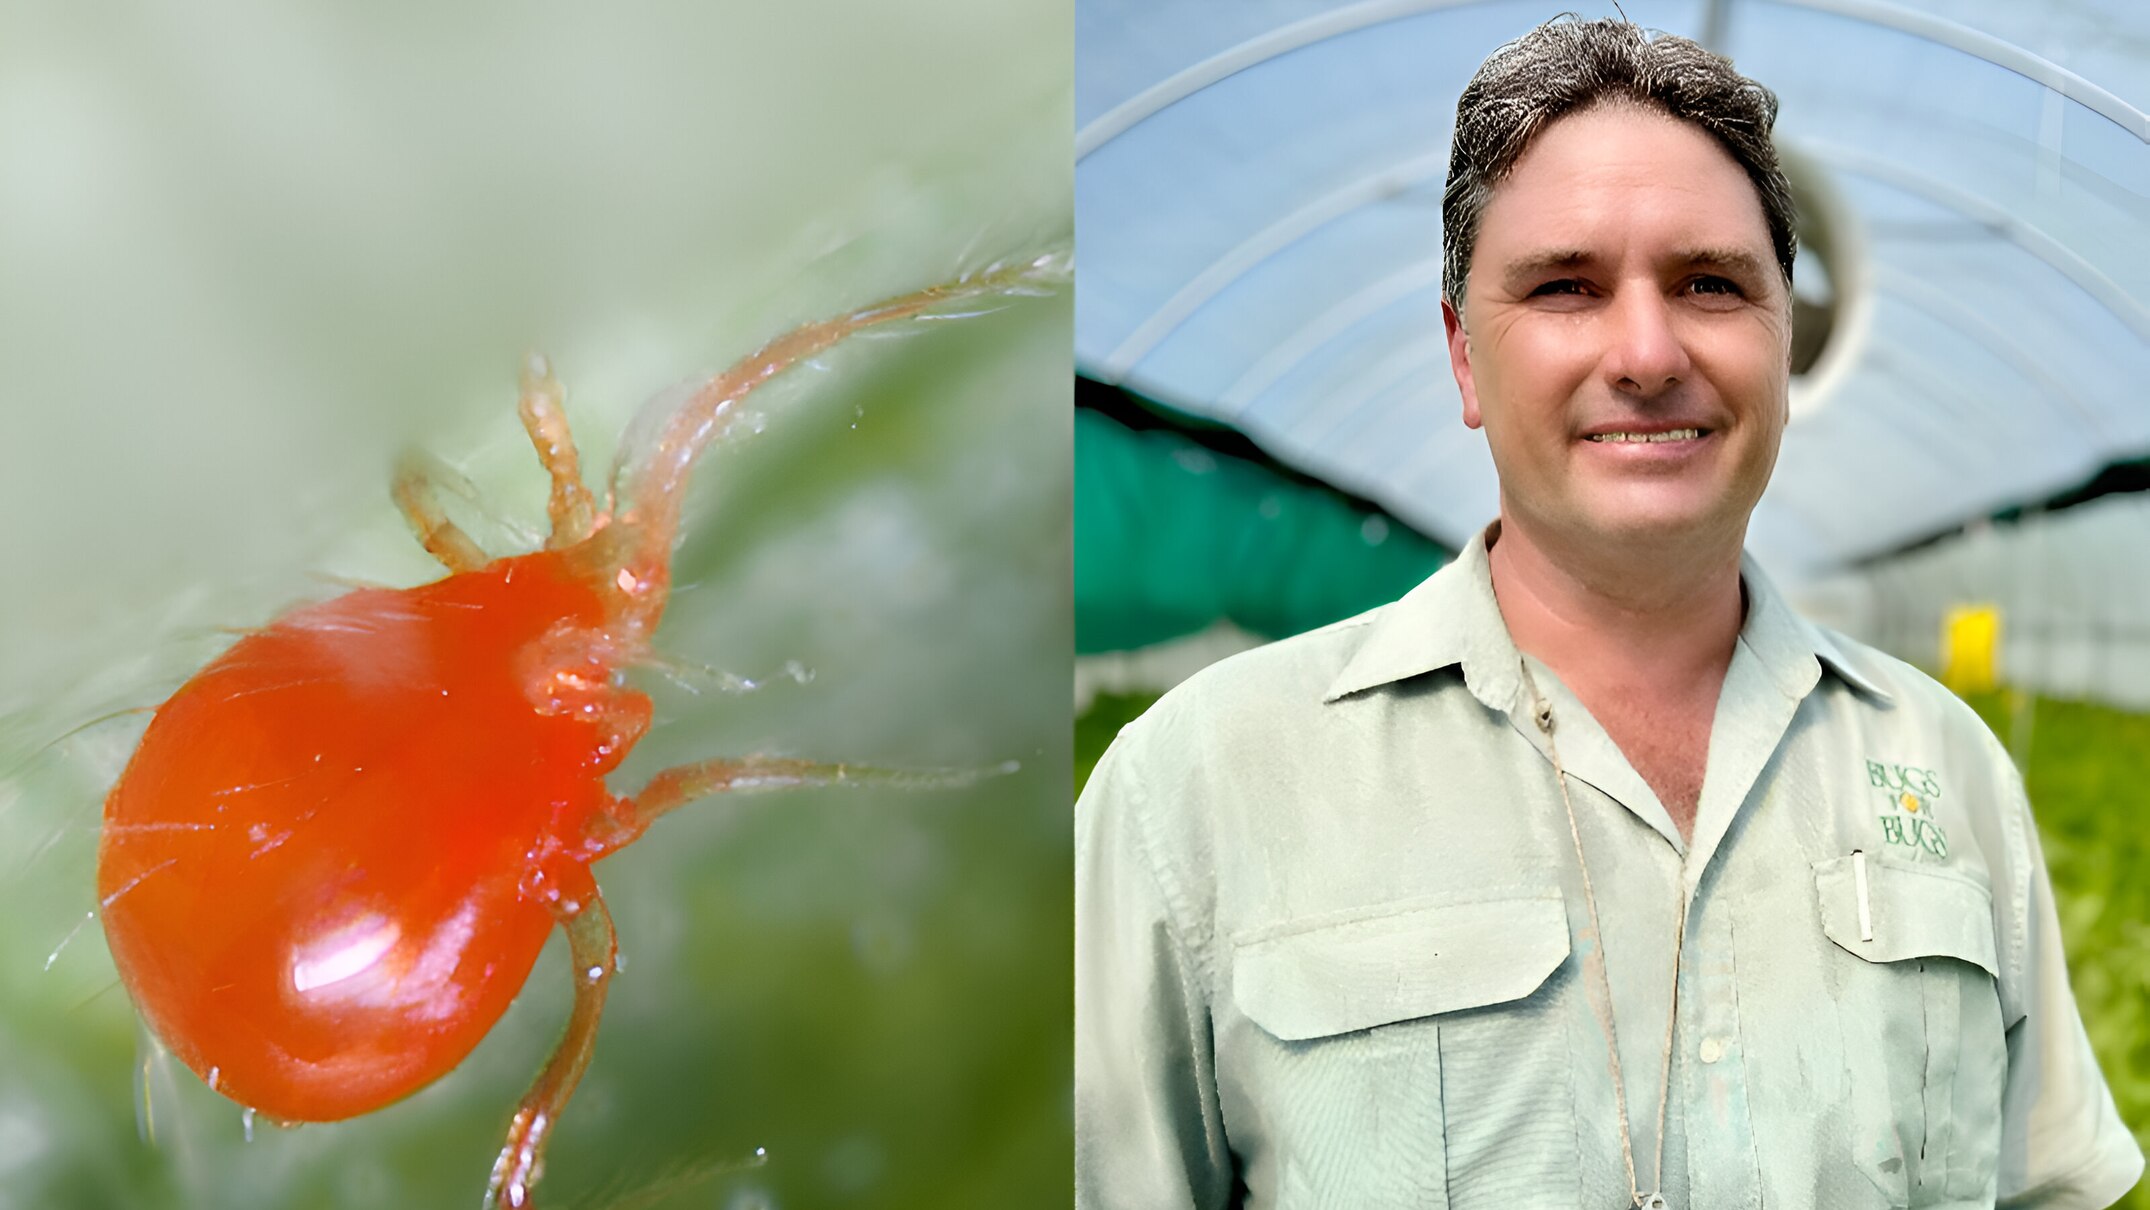 strawberry farmers using billions of tiny, blind, predatory mites as successful alternative to toxic insecticides